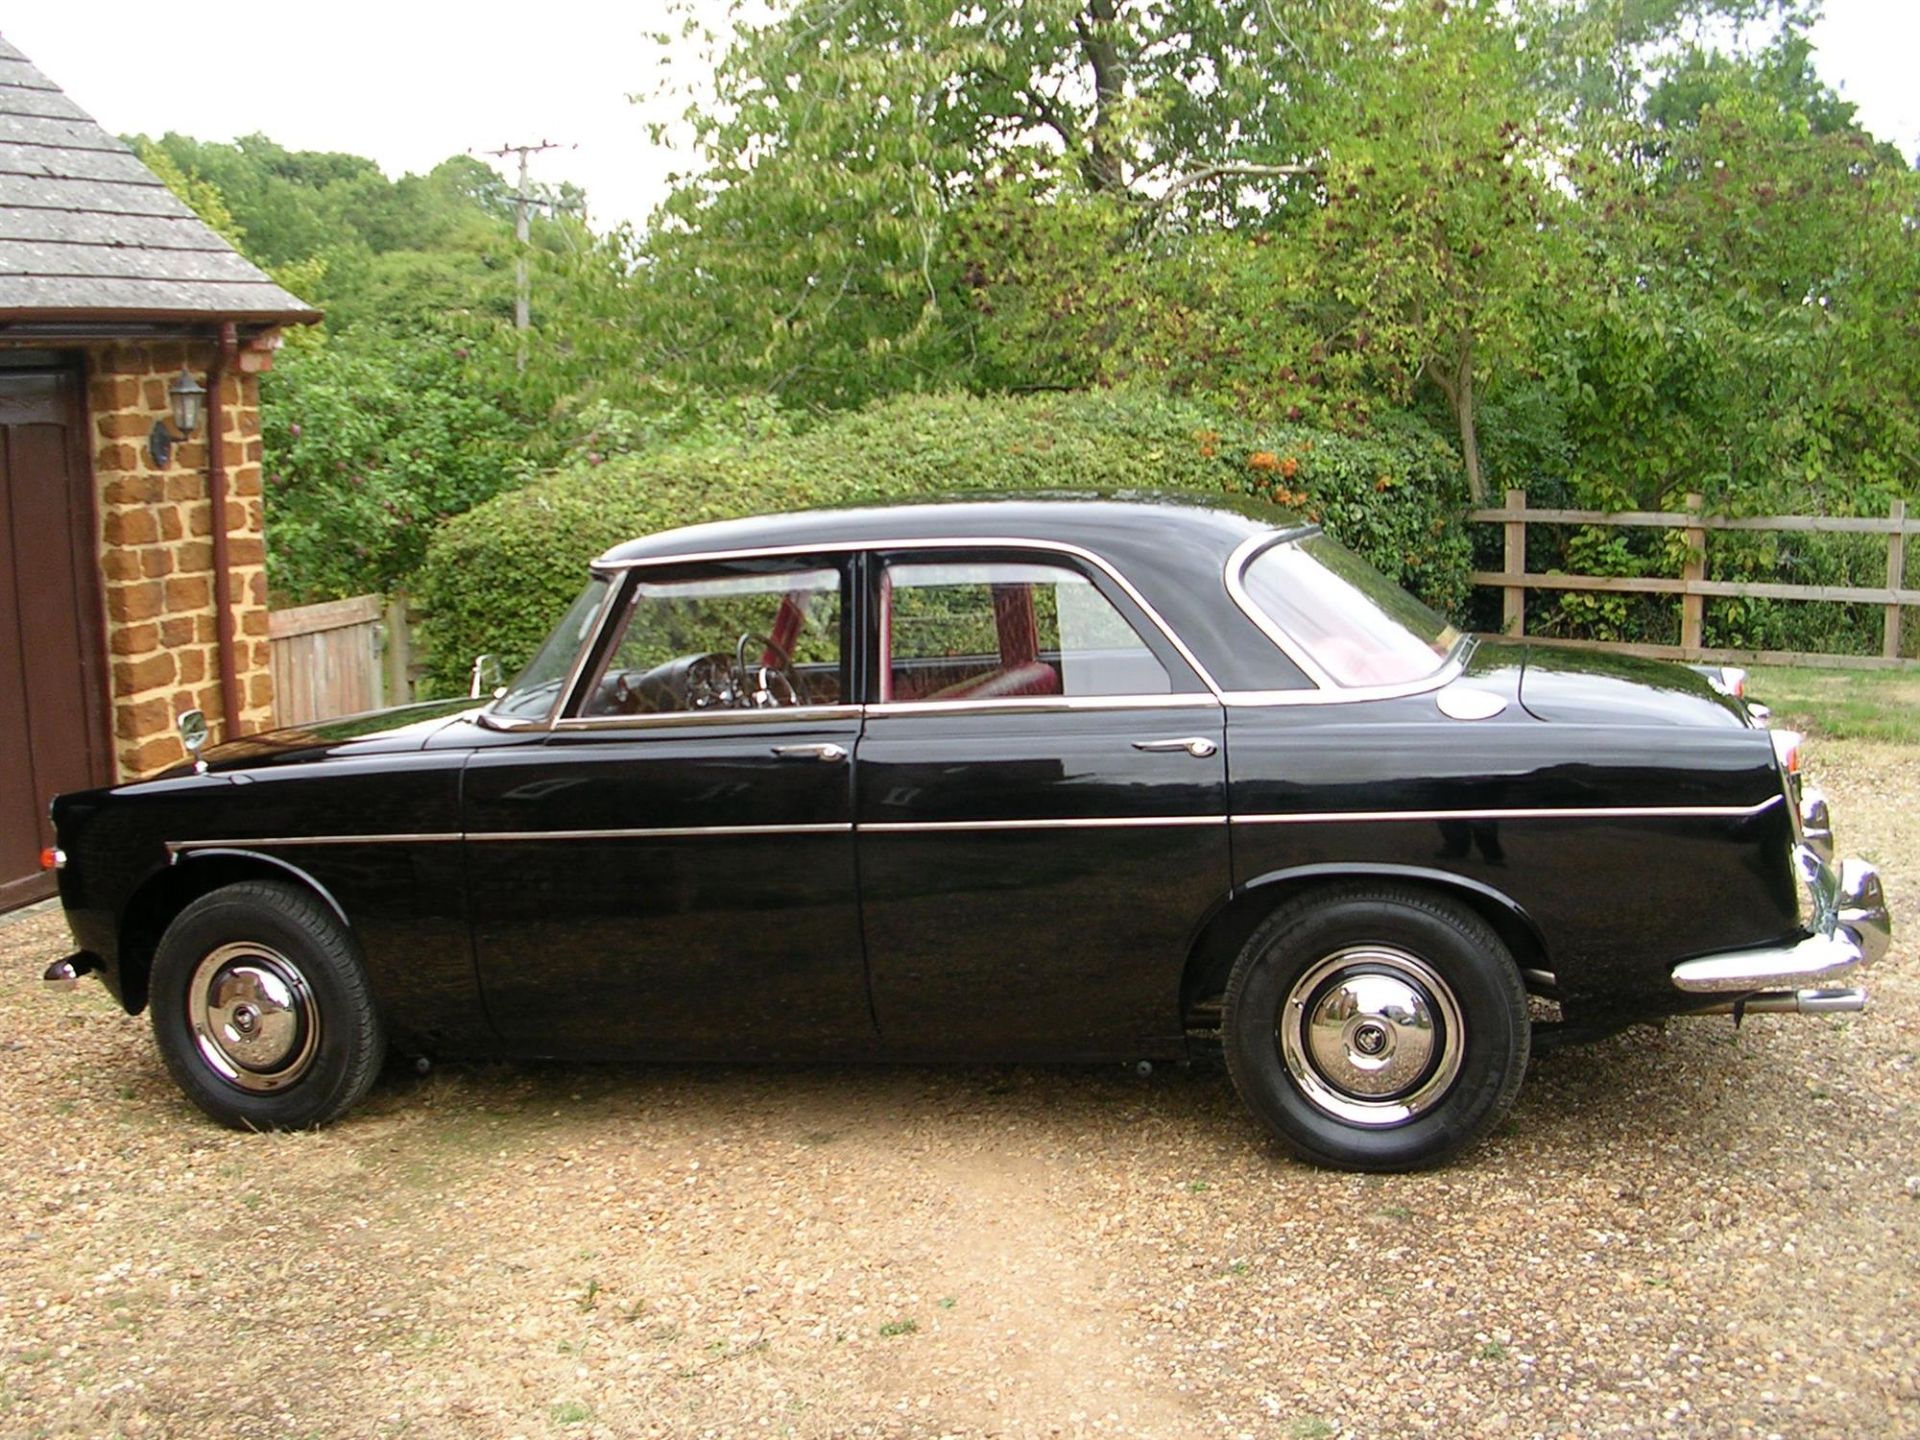 1959 Rover 3-Litre Saloon Mk1 (P5) - Image 6 of 10